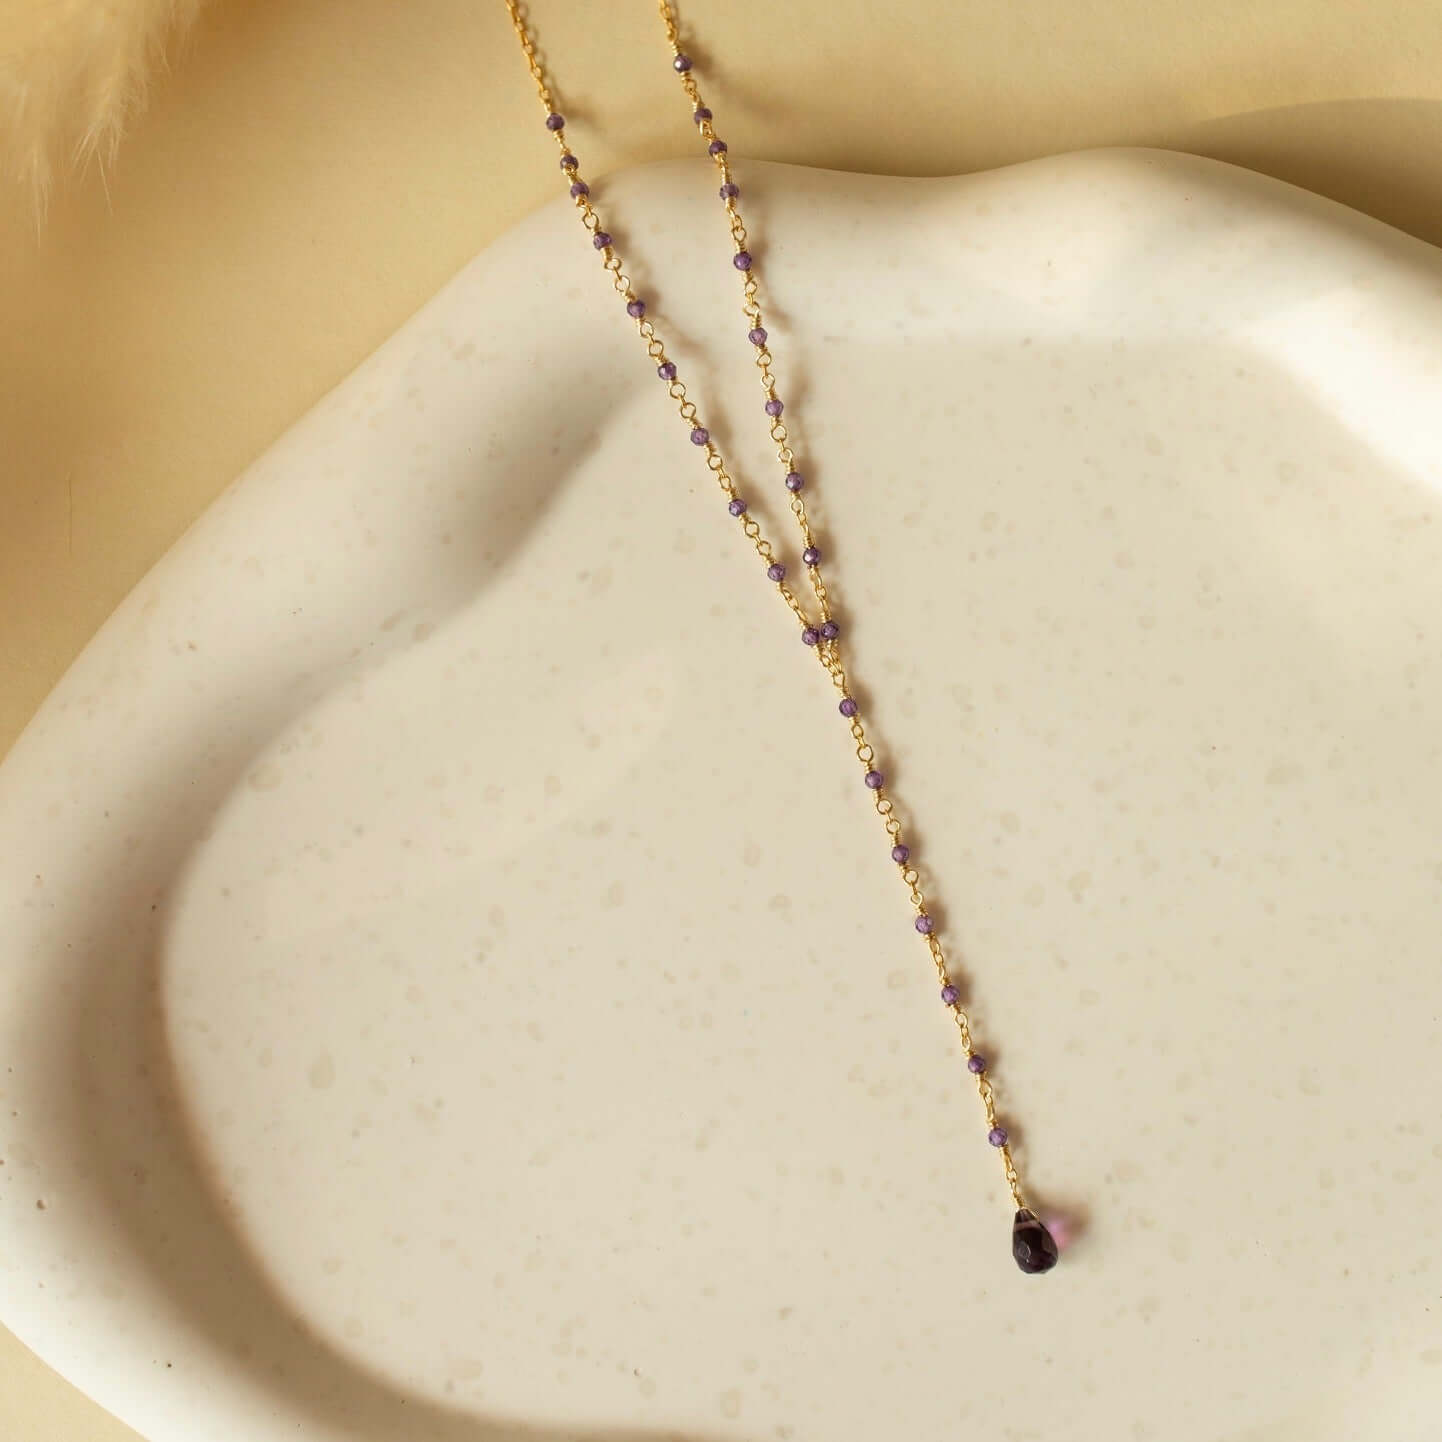 An amethyst necklace casually laid on a clay plate, showcasing handmade simplicity.